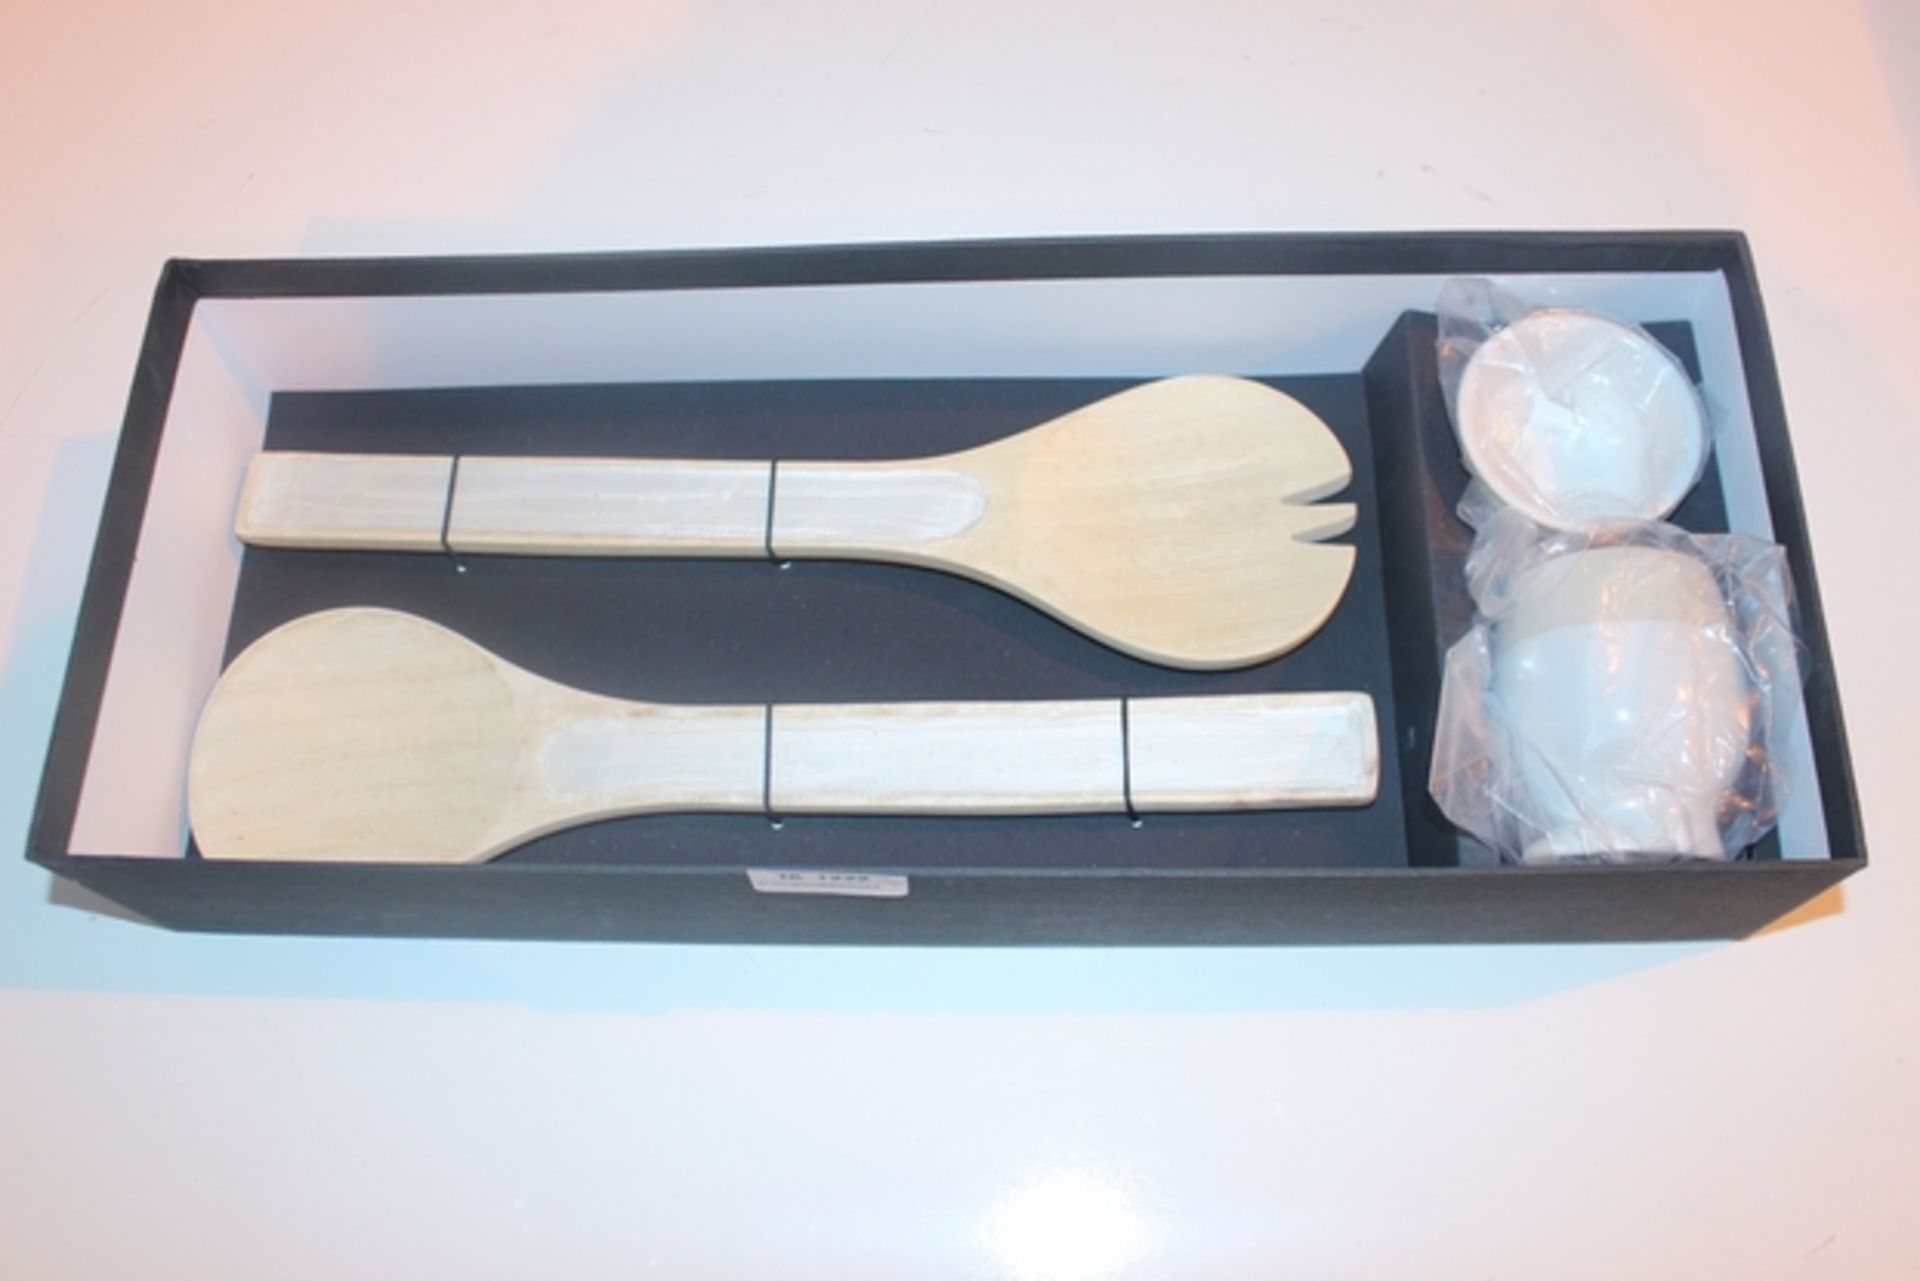 1X BOXED THE JUST SLATE COMPANY SALAD SERVER SET (DS-TLH-V) (61.011)